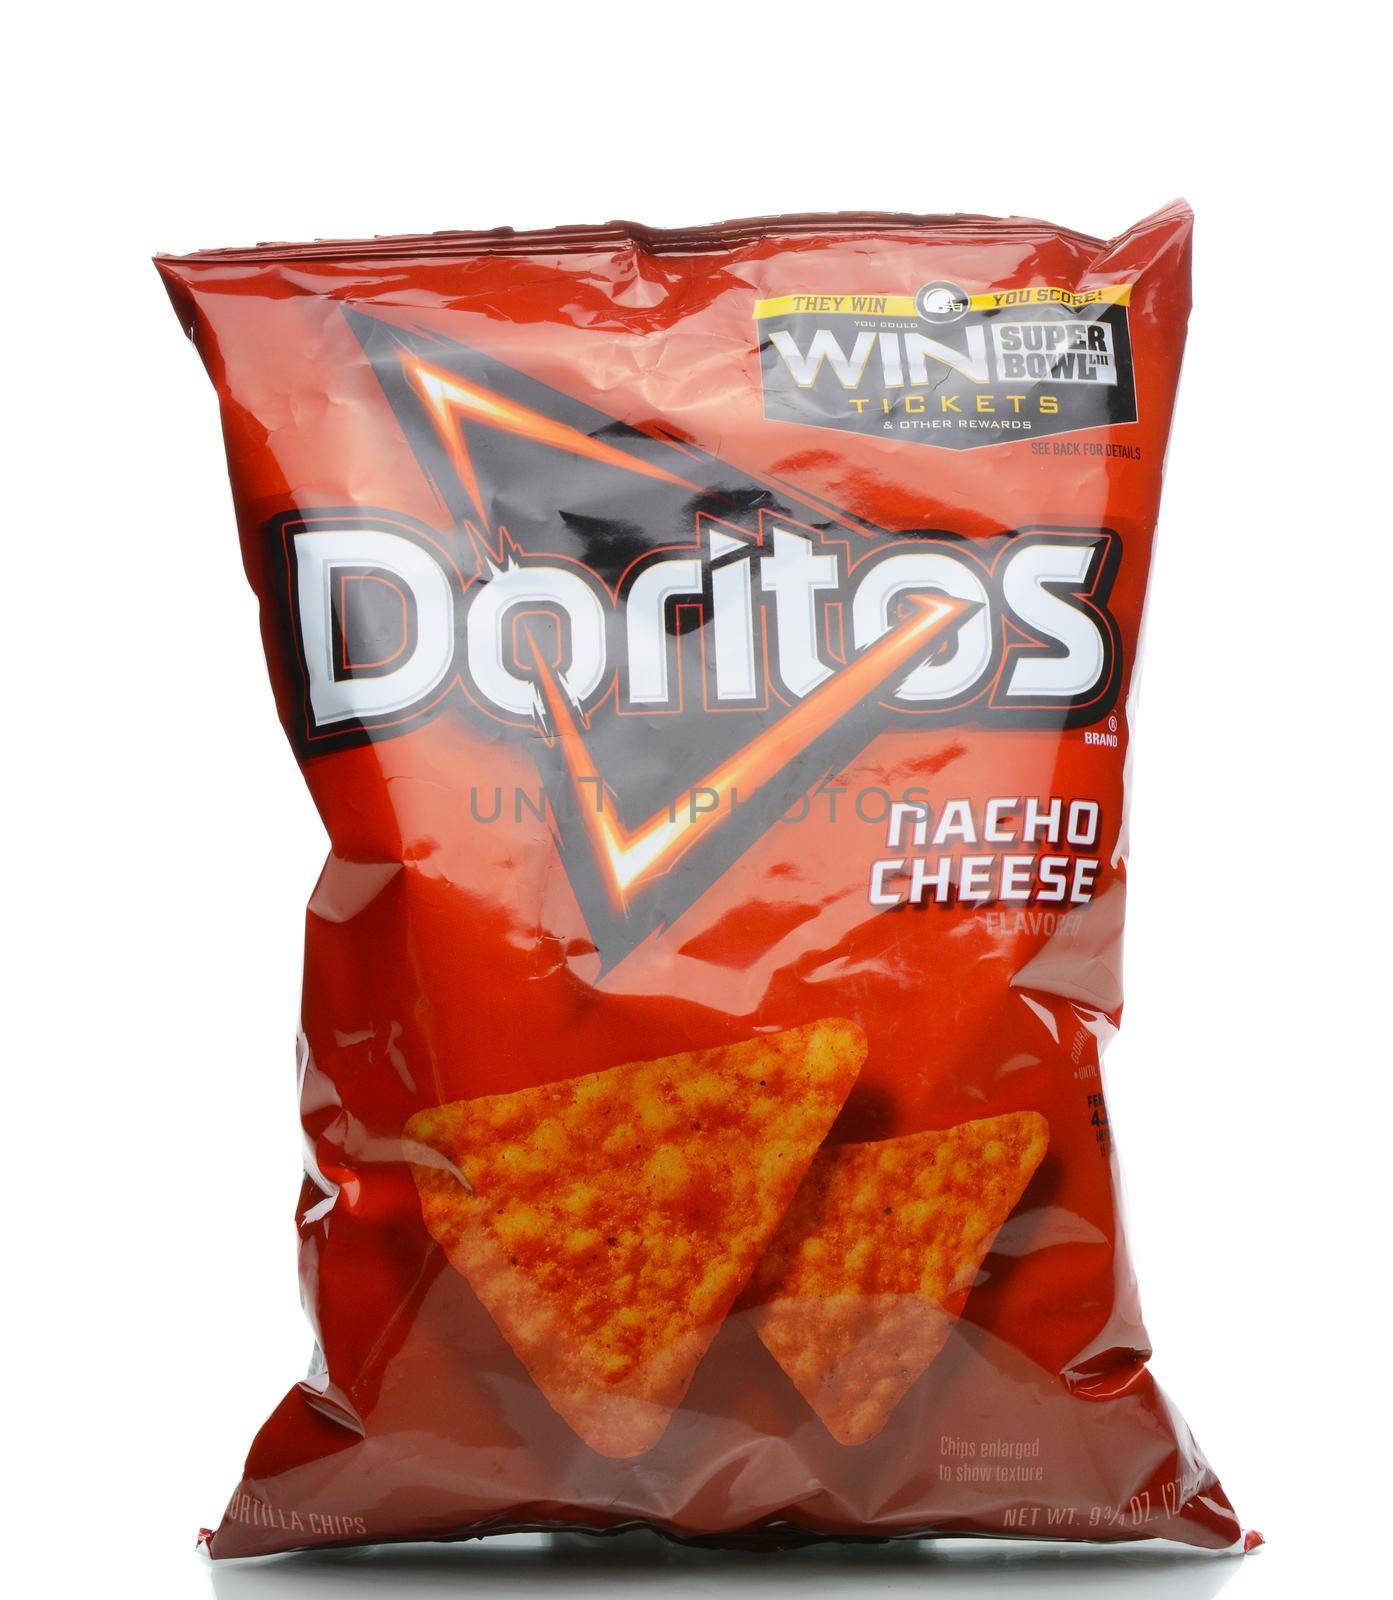 IRVINE, CALIFORNIA - JANUARY 4, 2018: Doritos Nacho Cheese Chips. Flavored tortilla chips produced since 1964 by Frito-Lay, a subsidiary of PepsiCo.